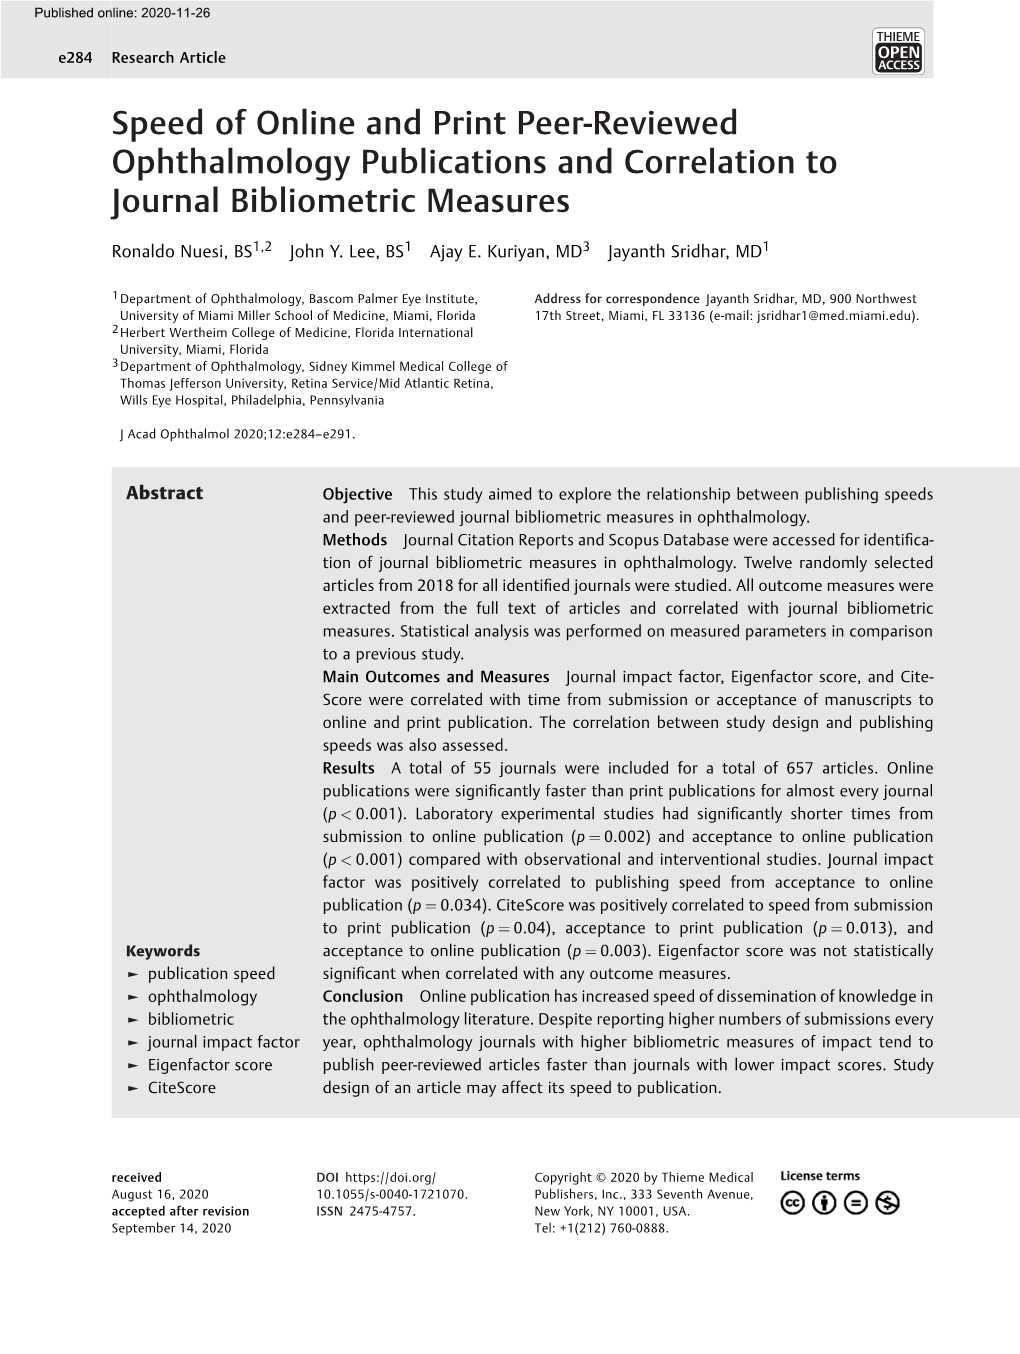 Speed of Online and Print Peer-Reviewed Ophthalmology Publications and Correlation to Journal Bibliometric Measures